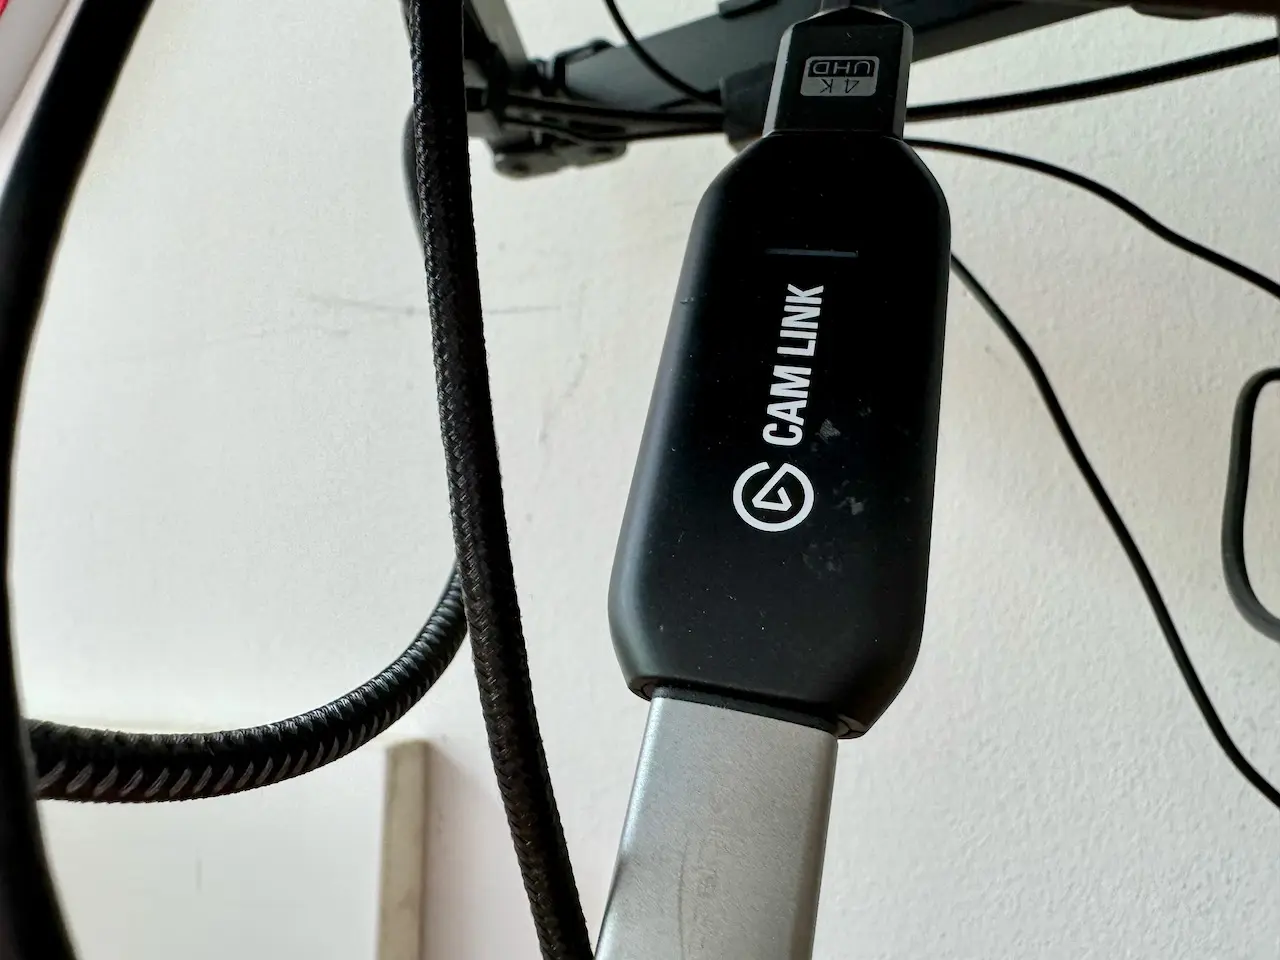 An image of an Elgato Cam link